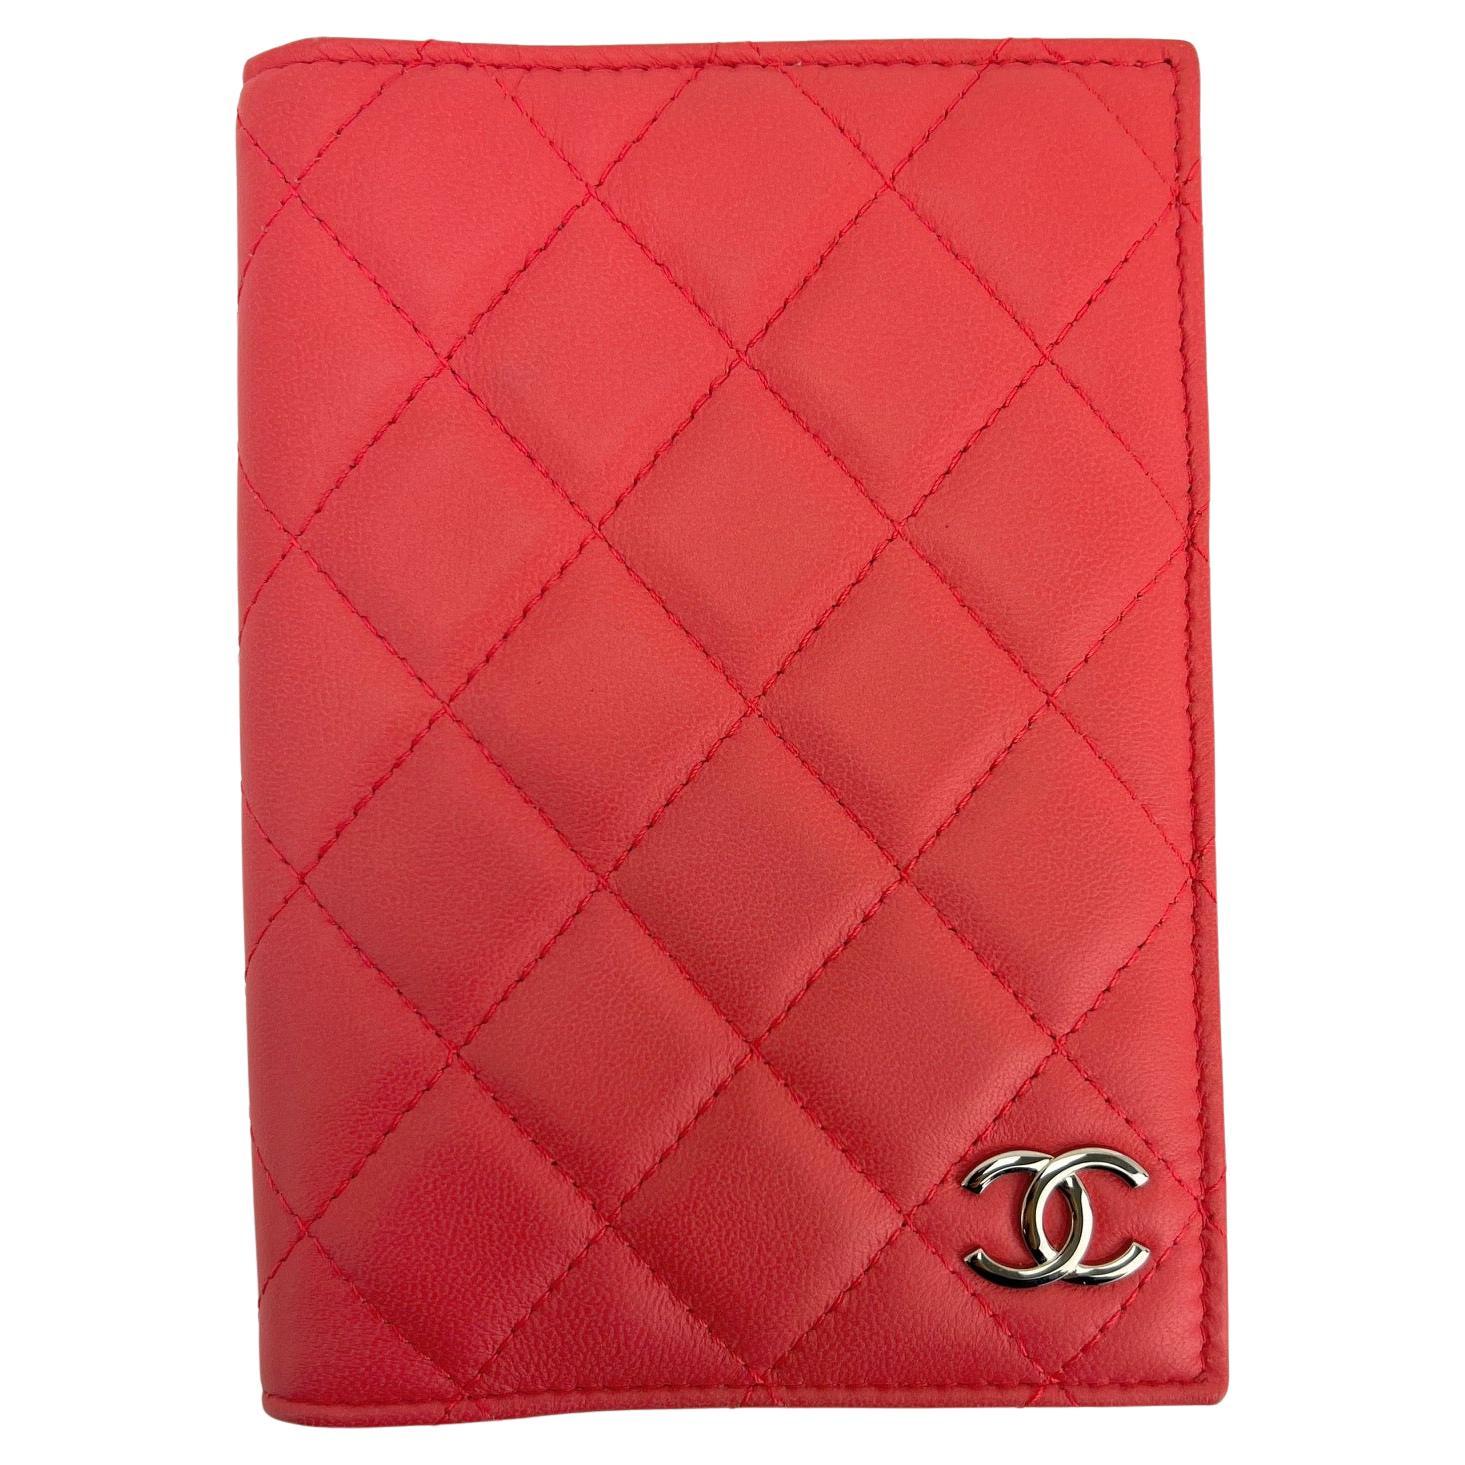 CHANEL Passport Holder Coral Quilted Calfskin Leather Wallet 